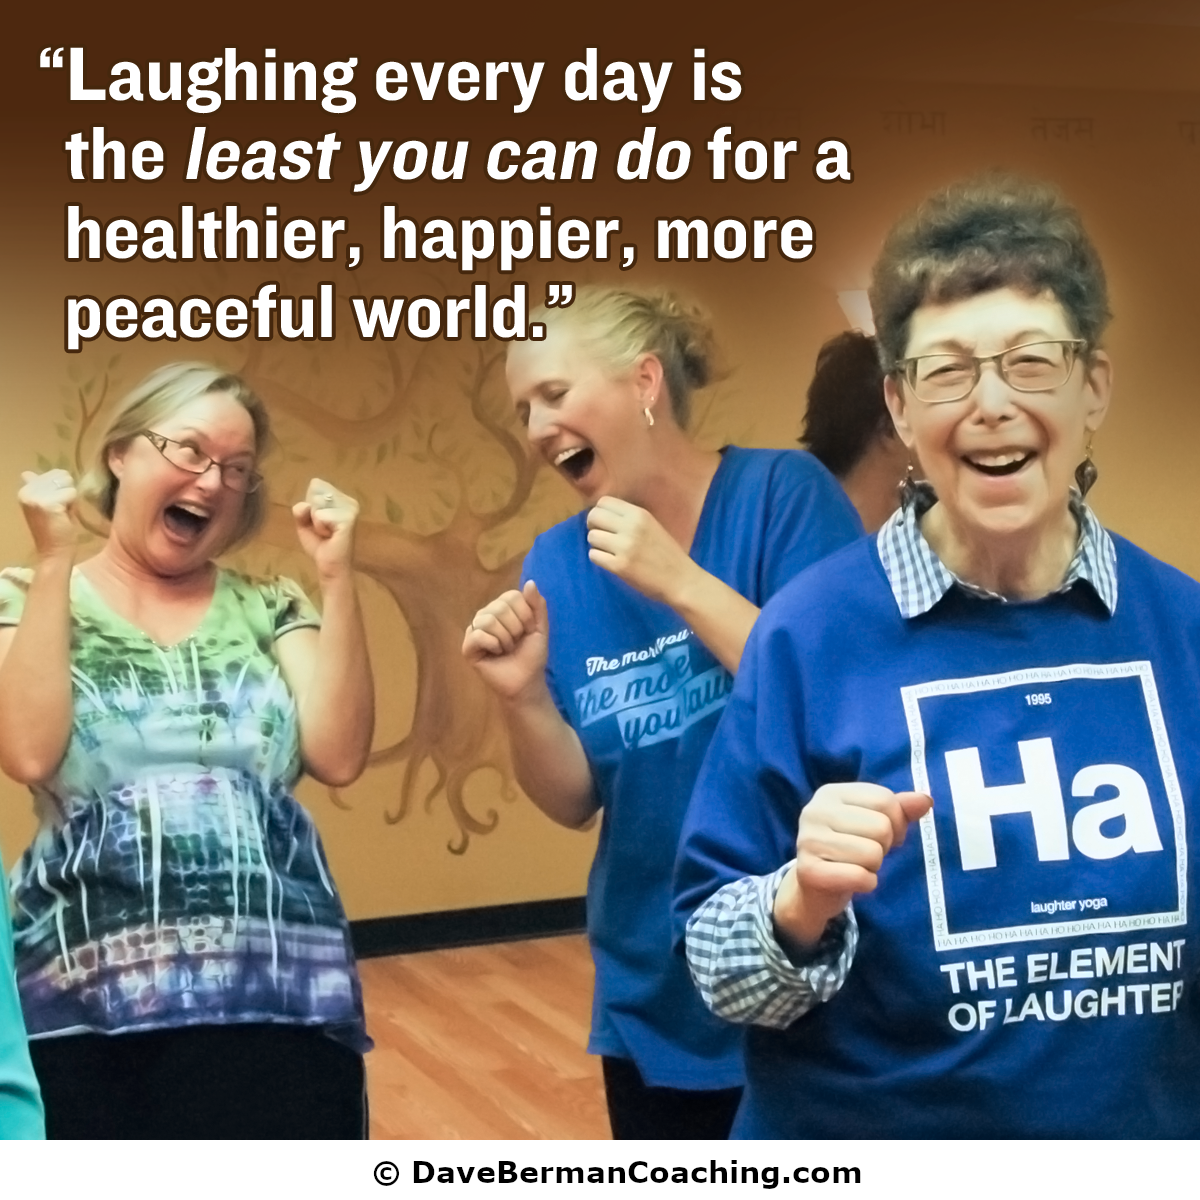 Women laugh during one of Dave's laughter sessions. Words: "Laughing every day is the least you can do for a healthier, happier, more peaceful world." © DaveBermanCoaching.com